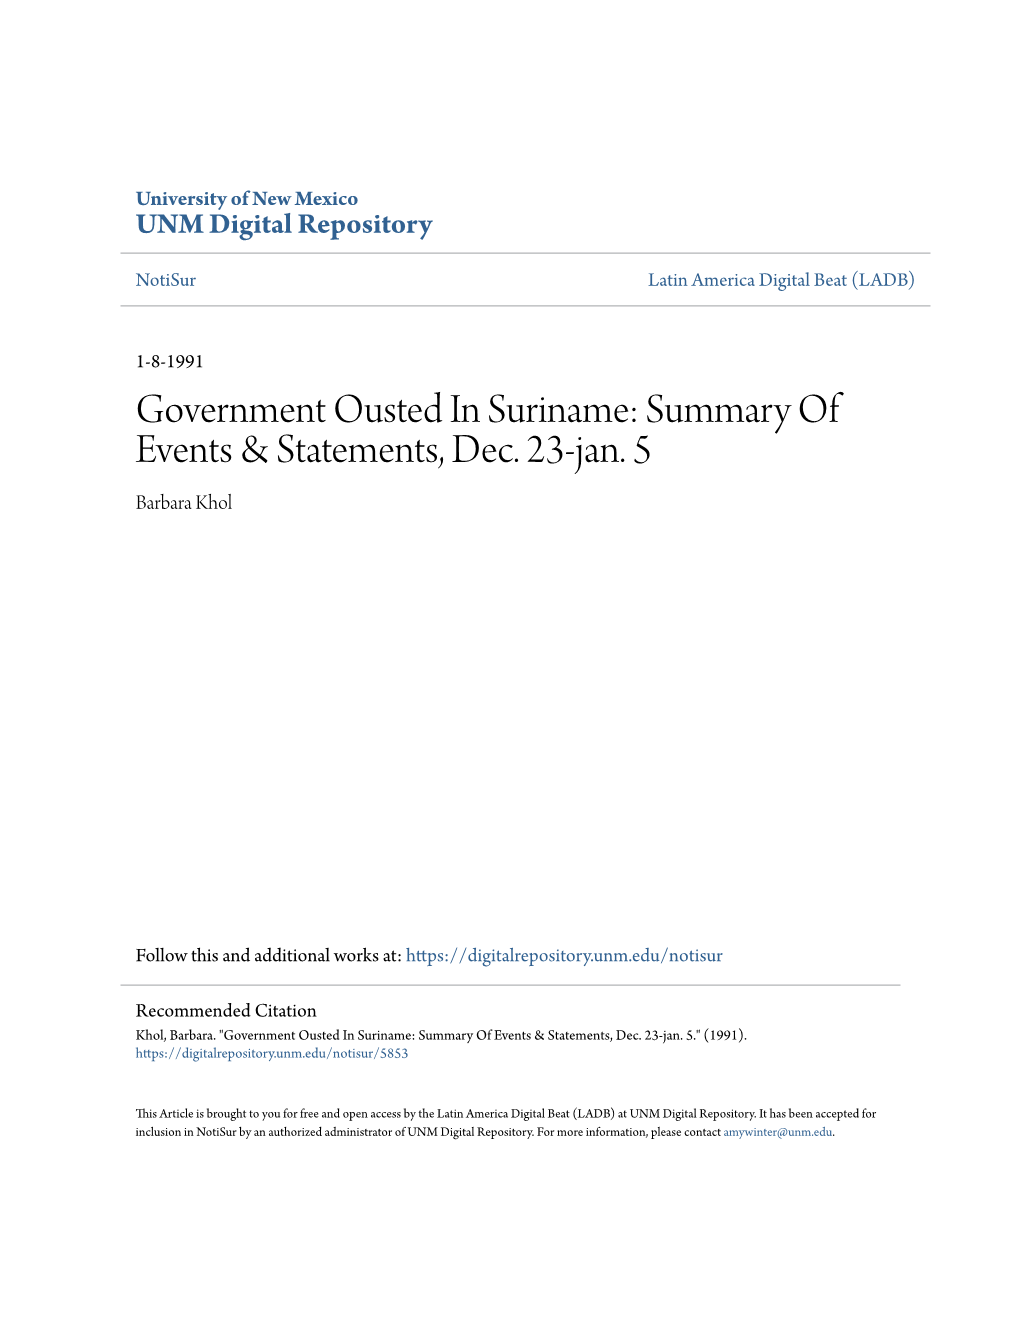 Government Ousted in Suriname: Summary of Events & Statements, Dec